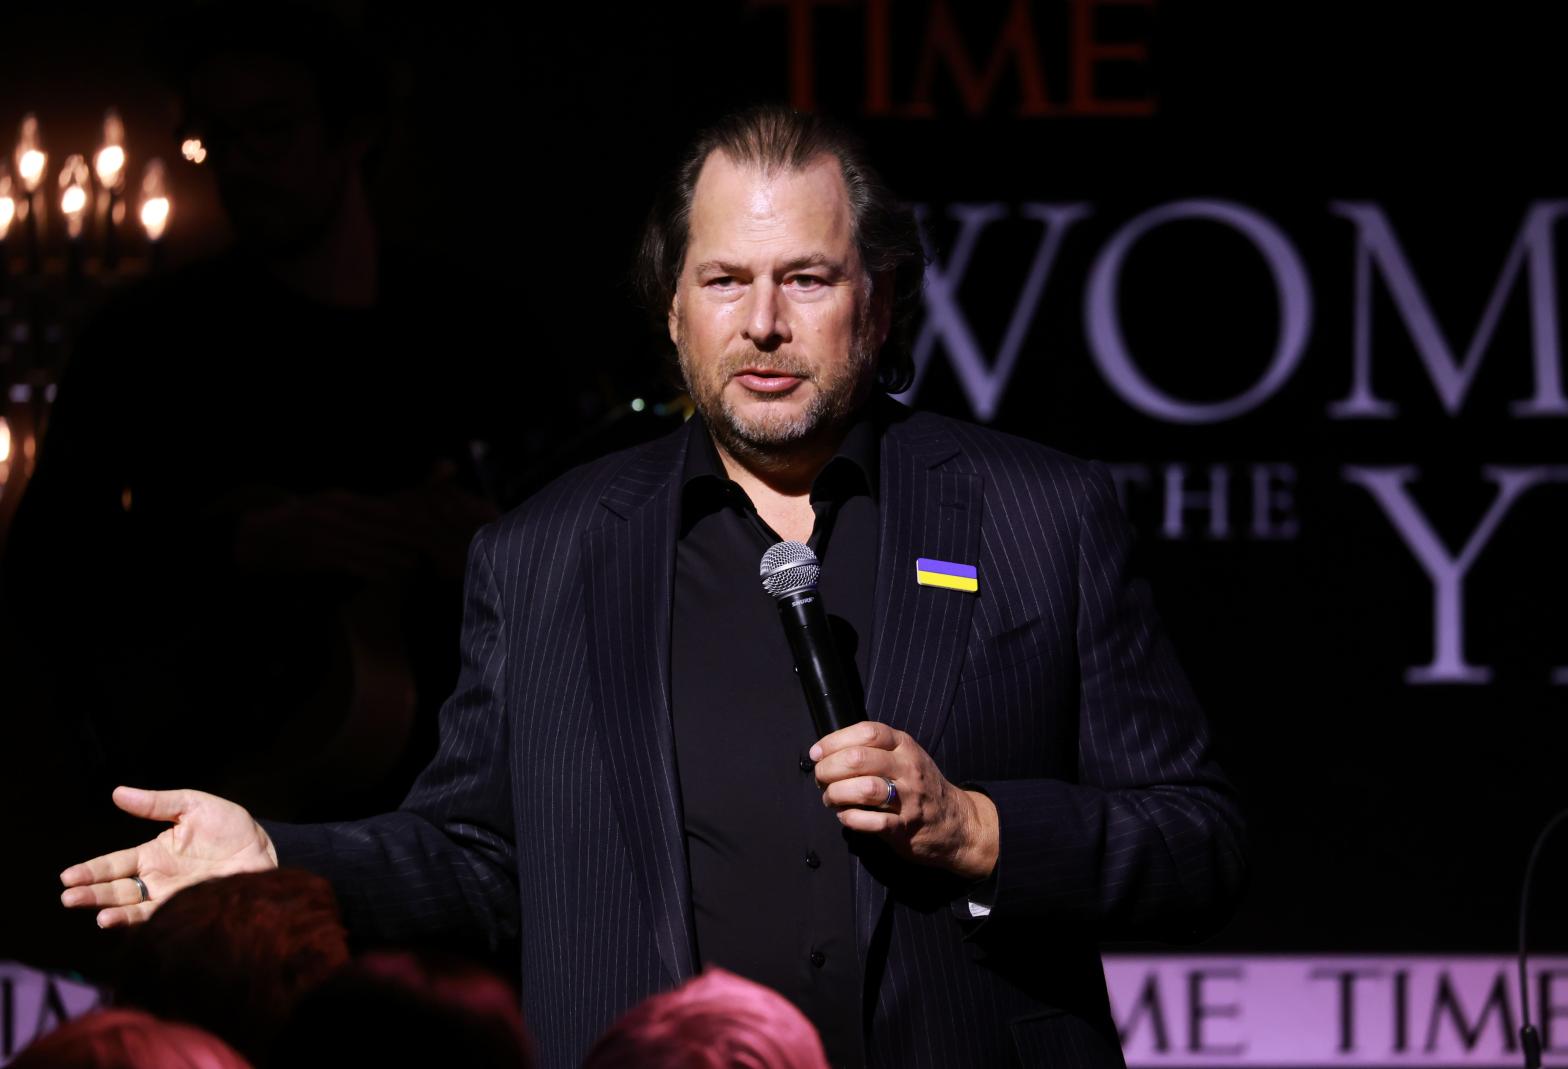 Salesforce co-CEO Marc Benioff is not known for staying quiet on the most pressing issues of the day. (Photo: Matt Winkelmeyer, Getty Images)